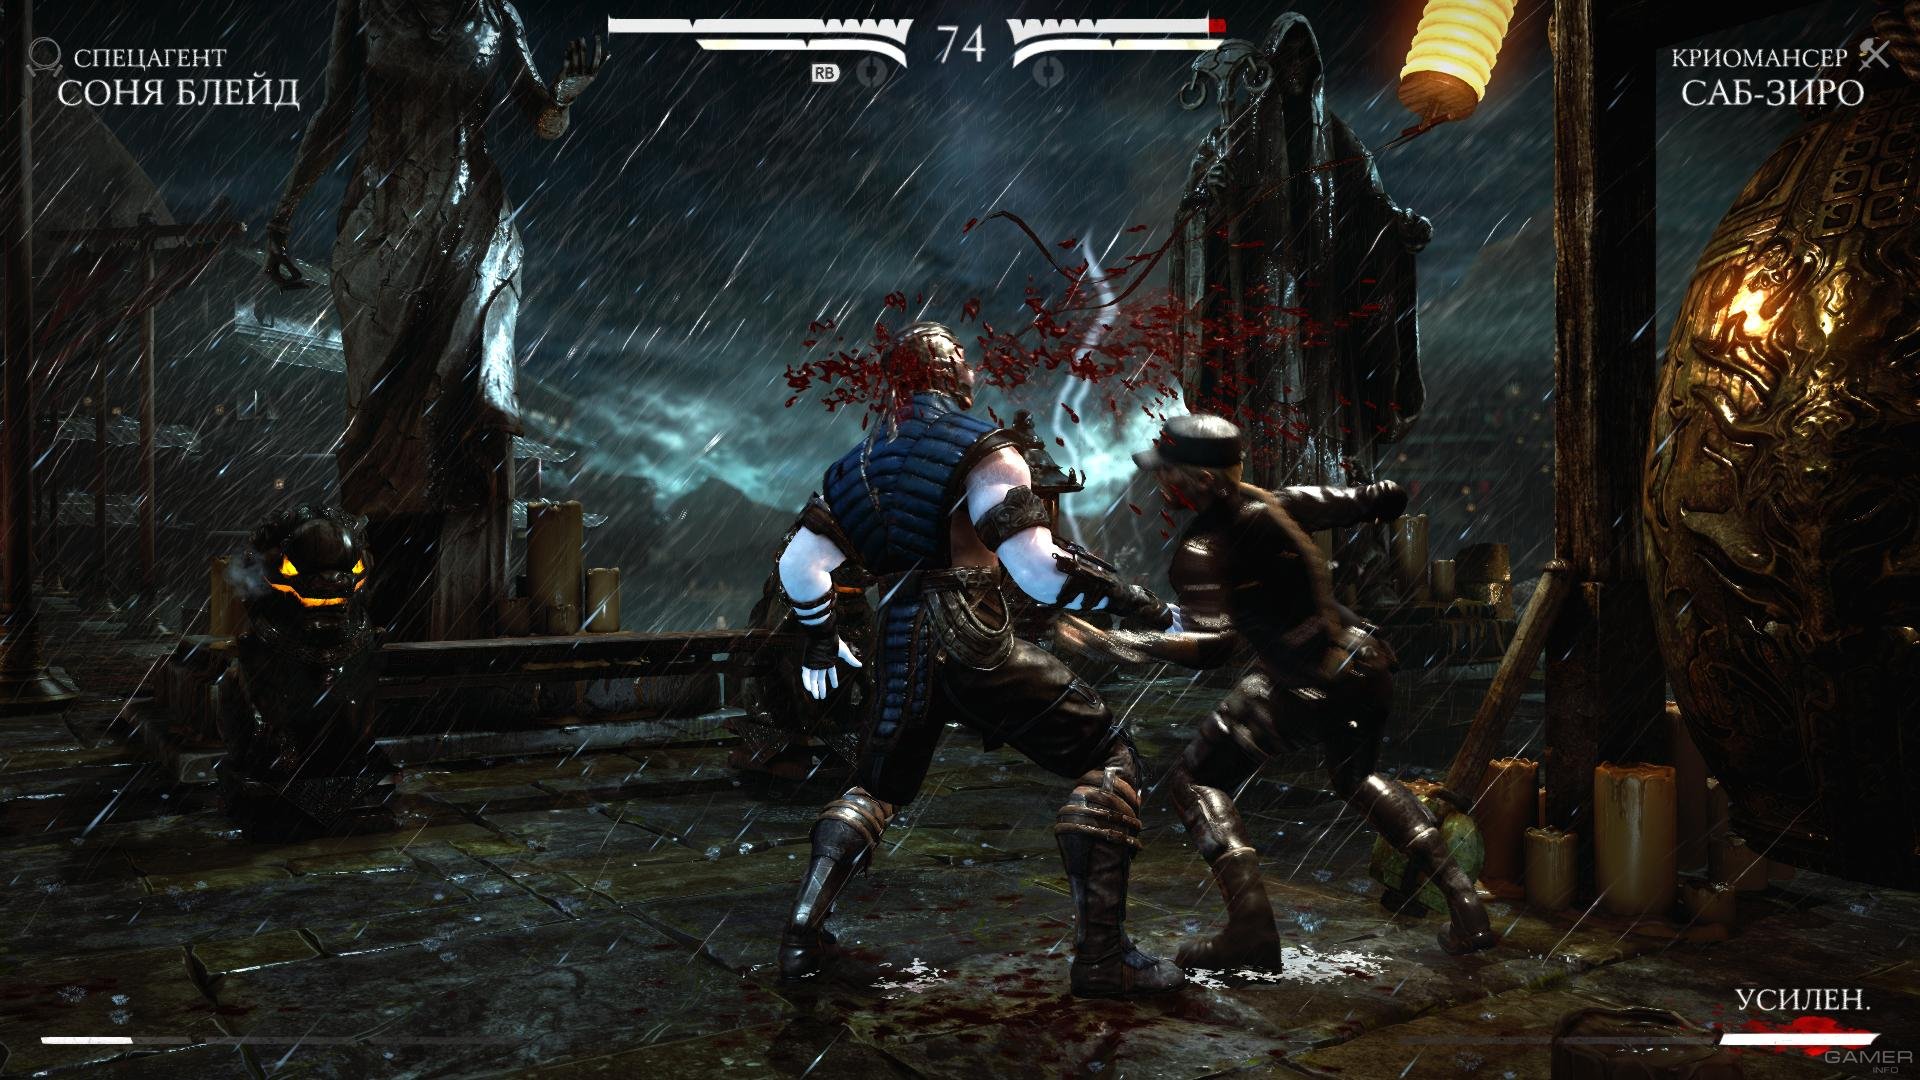 Microsoft Announces Mortal Kombat X Free Play Weekend, Download the  Fighting Title Now - Gameranx